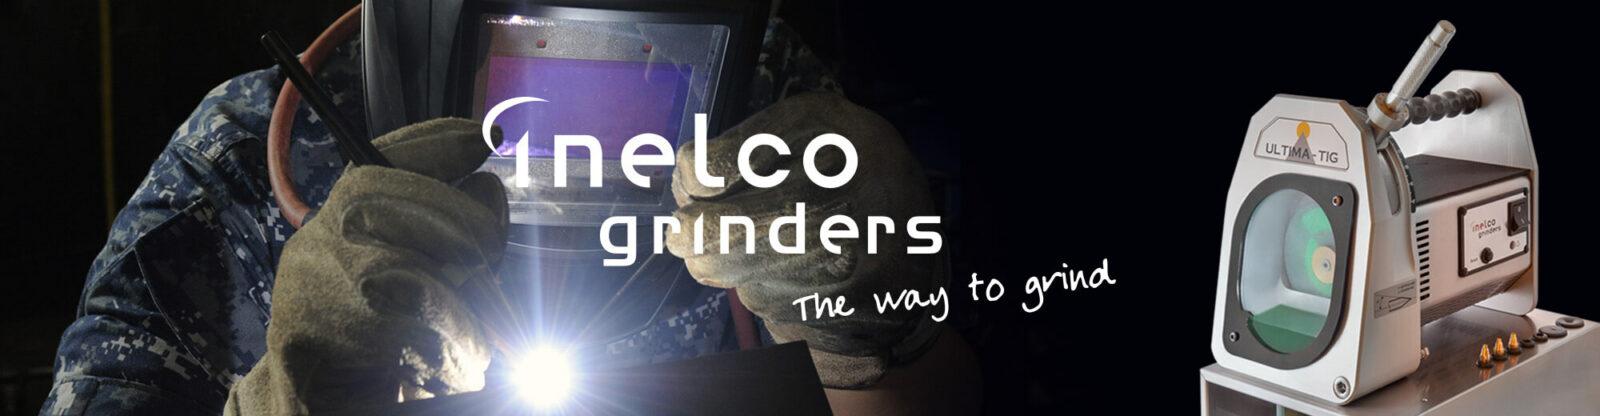 Inelco Grinders - World-class grinding of welding electrodes